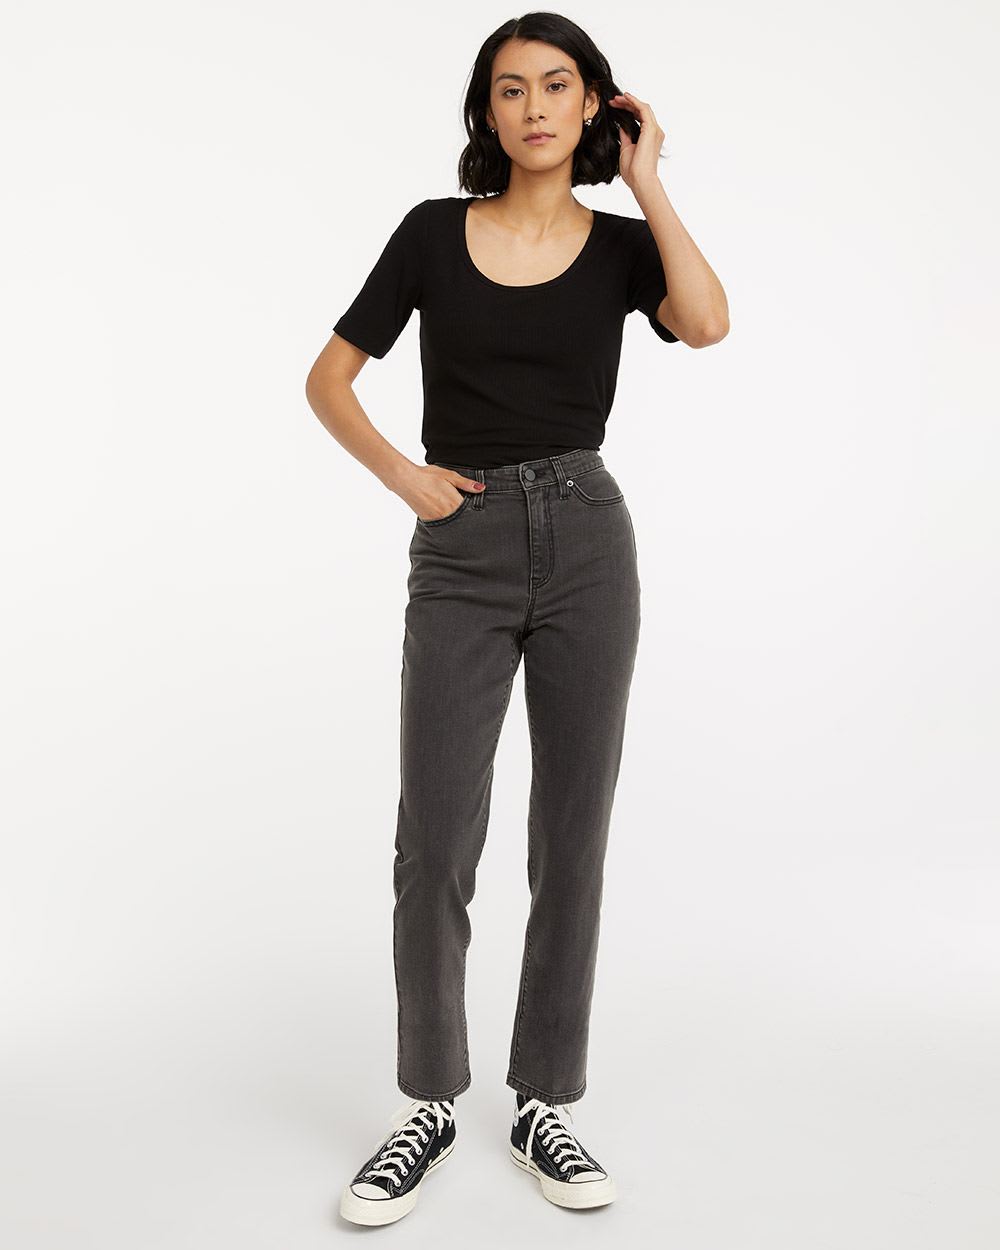 Super High-Rise Black Ankle Jean with Straight Leg - Petite